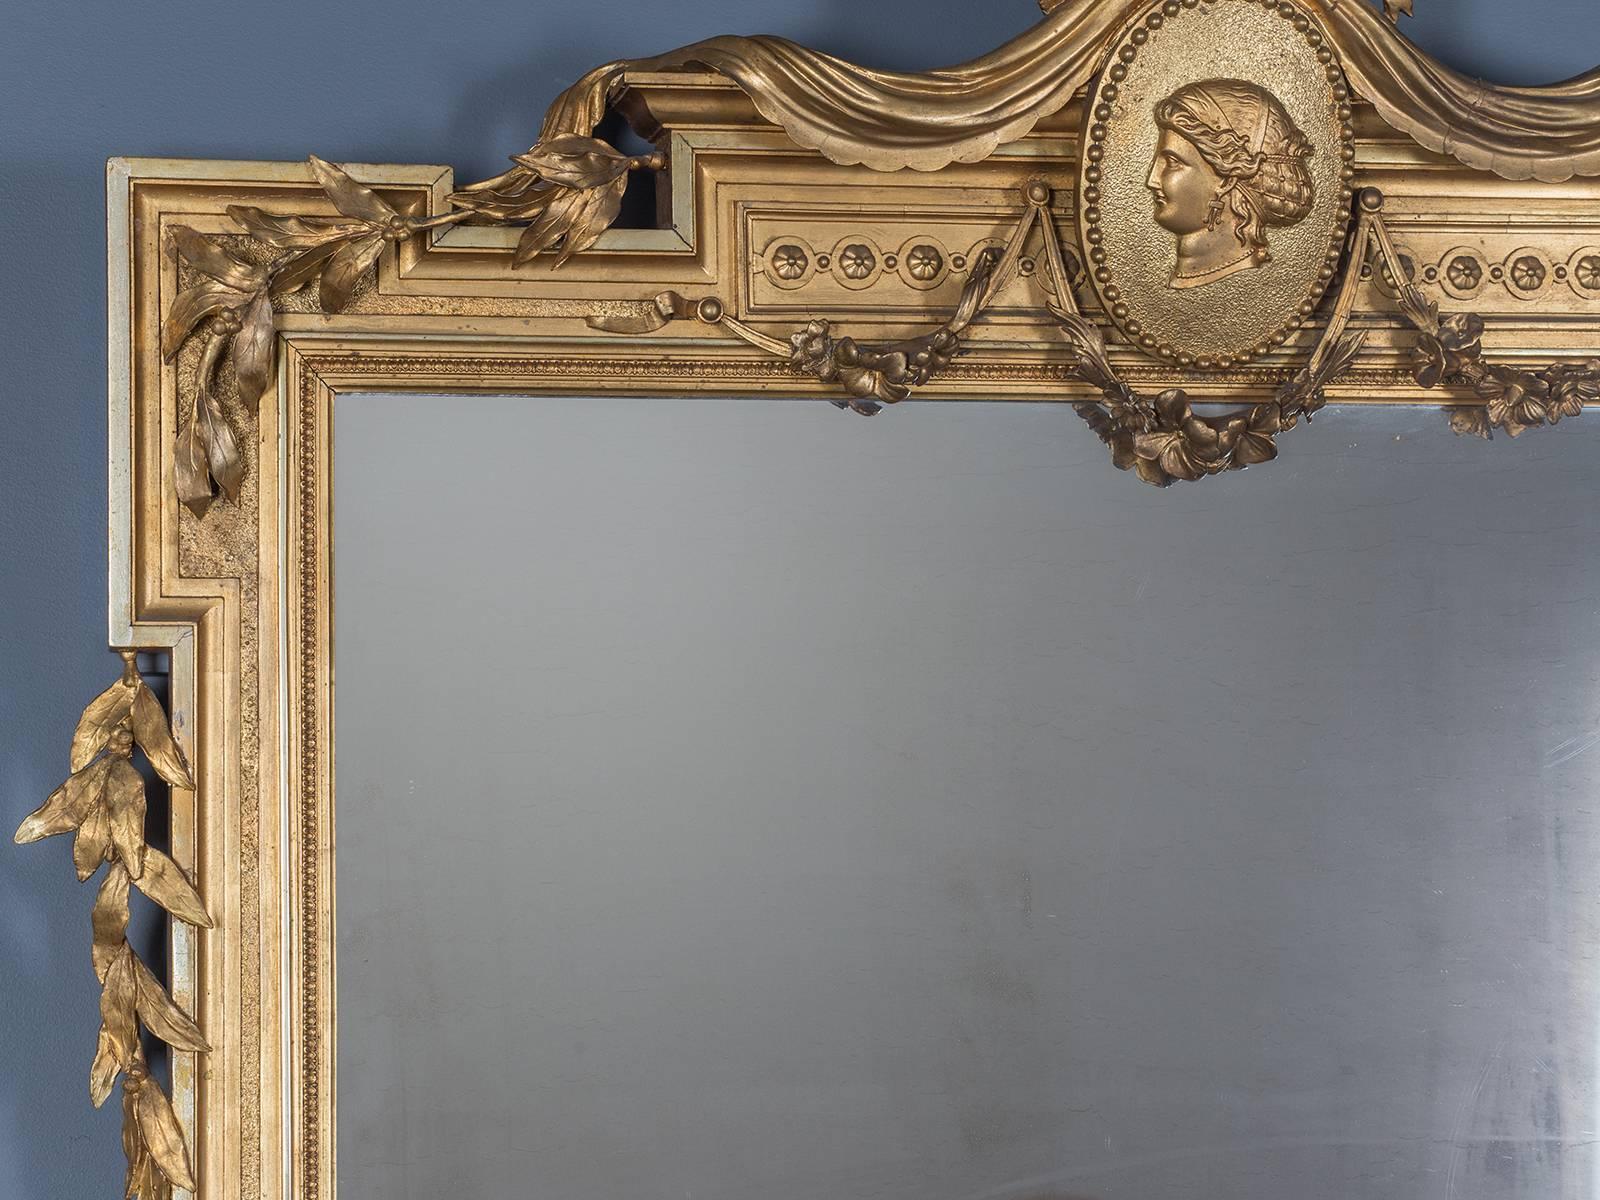 This rare antique Italian horizontal mirror circa 1850 has an elaborate carved giltwood frame featuring a portrait medallion of an aristocratic lady in the centre framing the mirror glass. The fine carving and moulded elements seen here are a